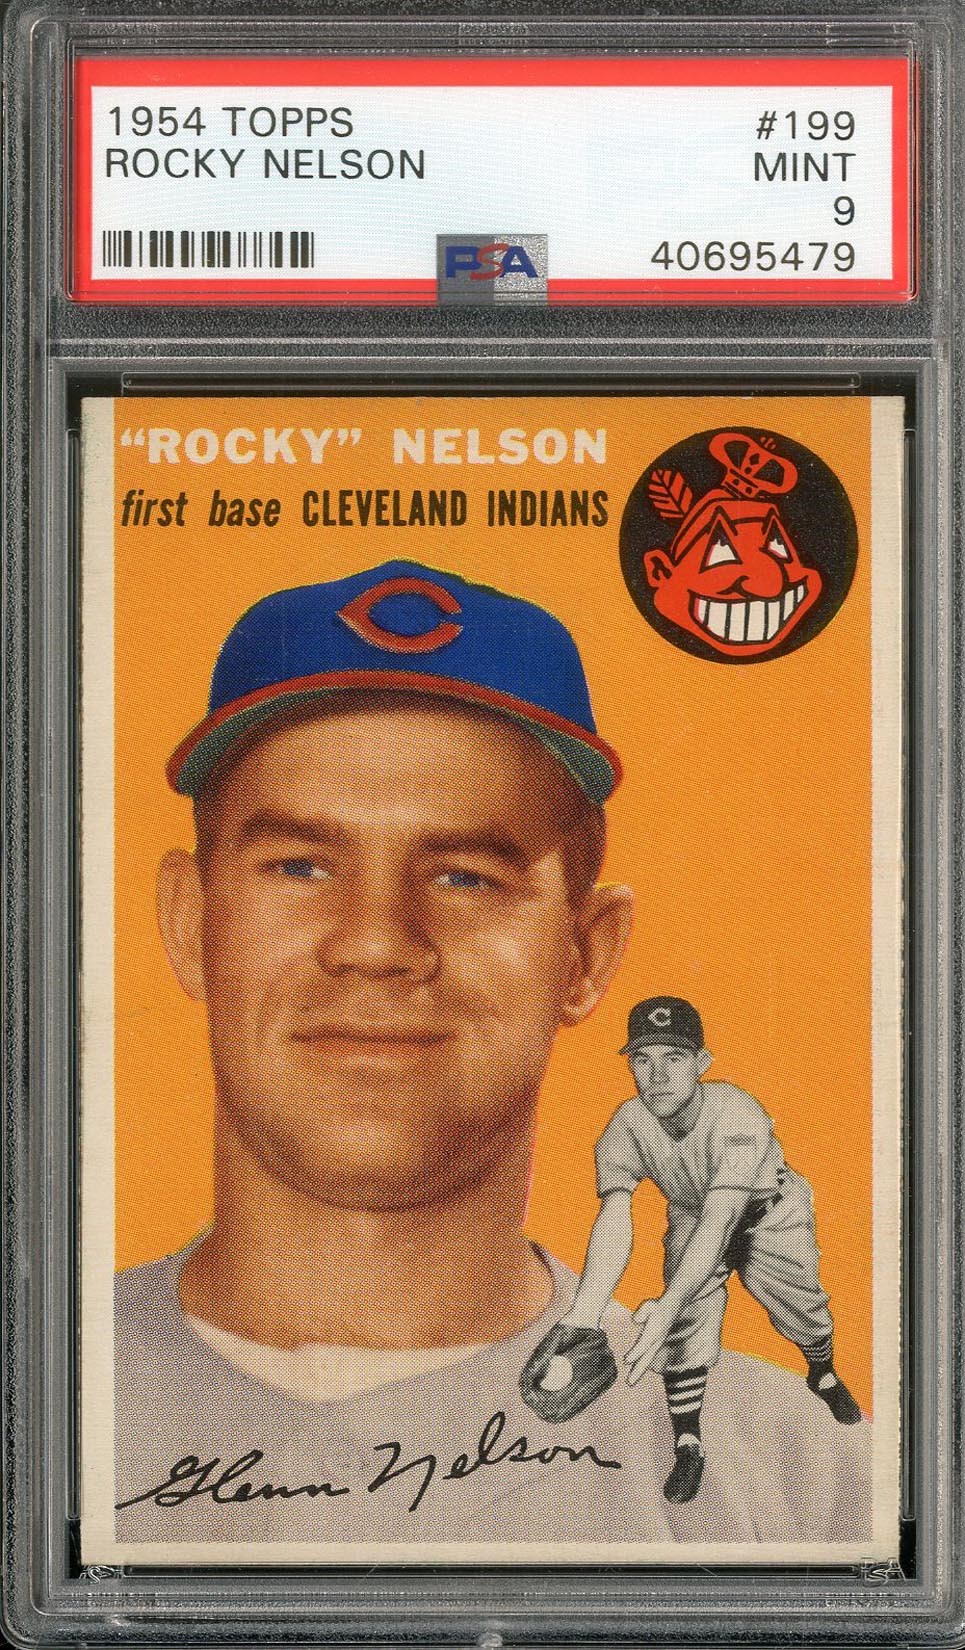 Baseball and Trading Cards - 1954 Topps #199 Rocky Nelson - PSA MINT 9